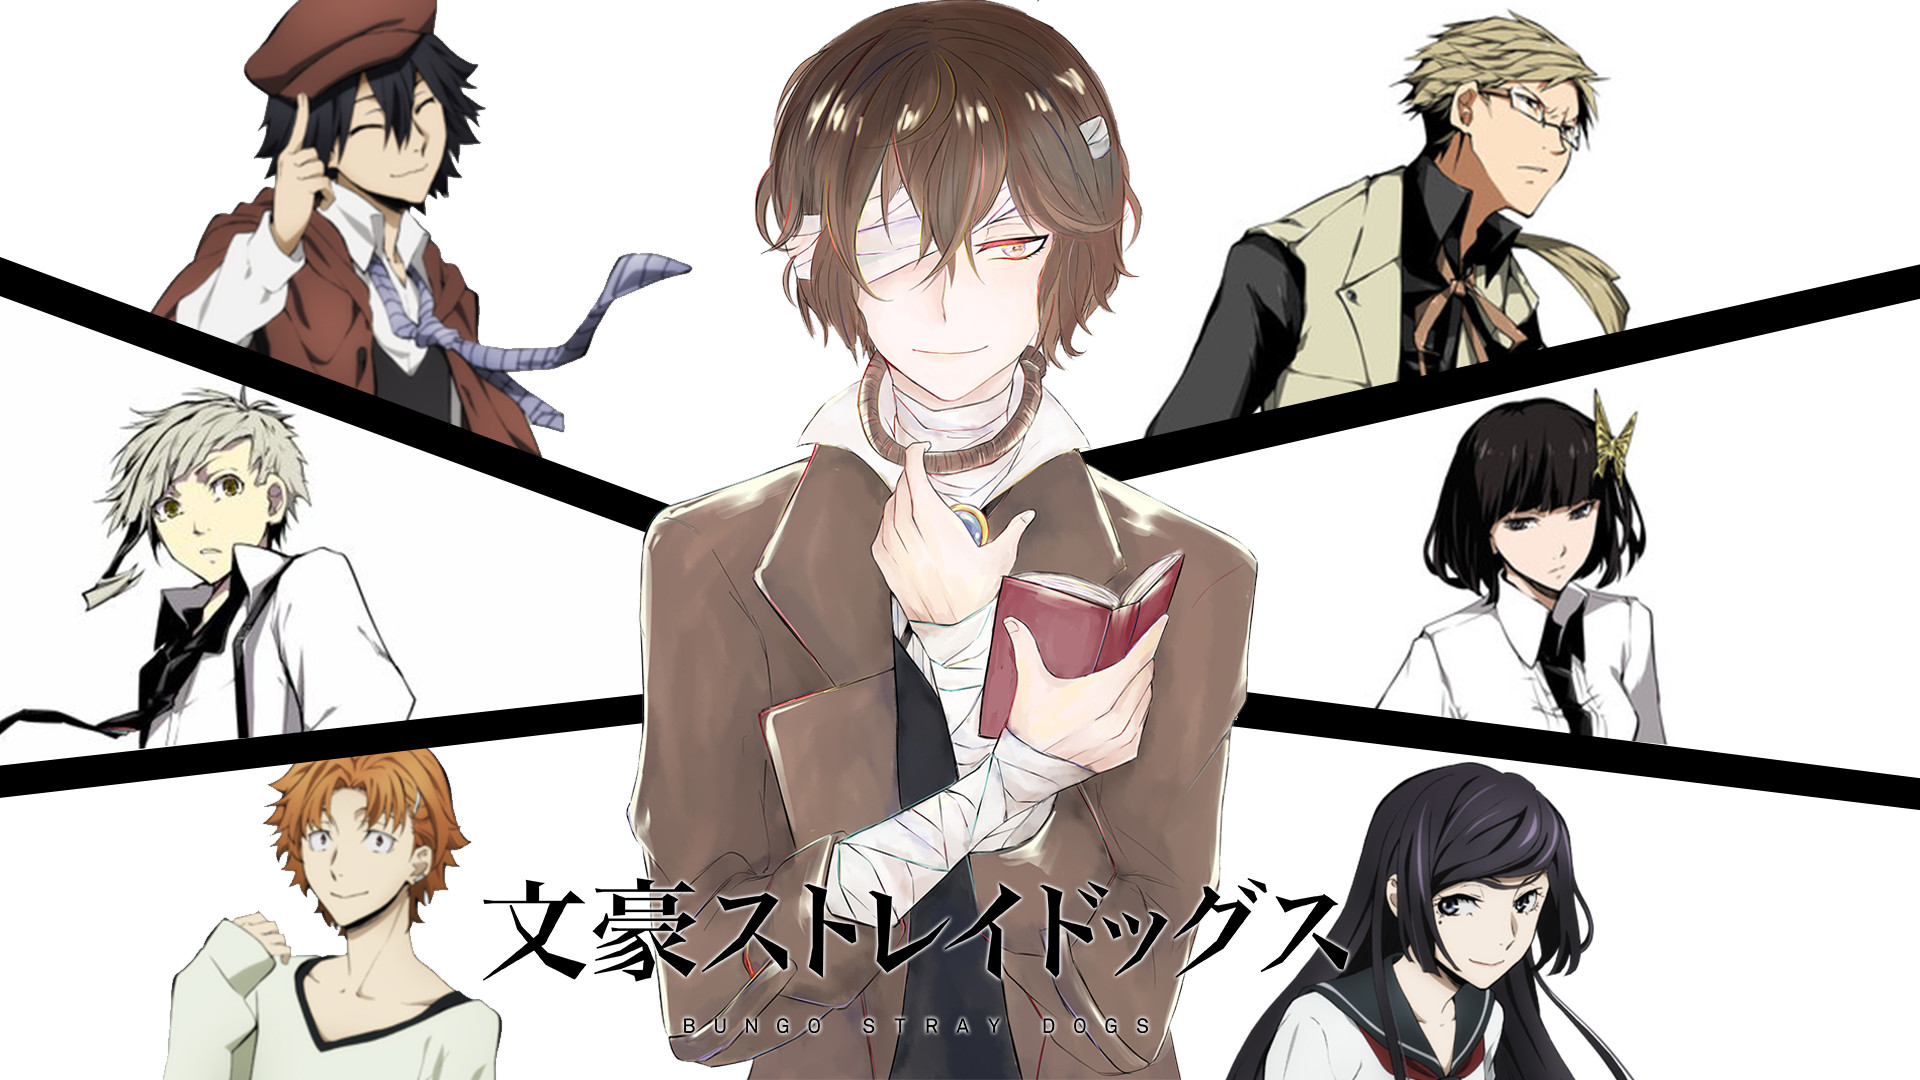 Bungo Stray Dogs Wallpaper Desktop - Join now to share and explore tons